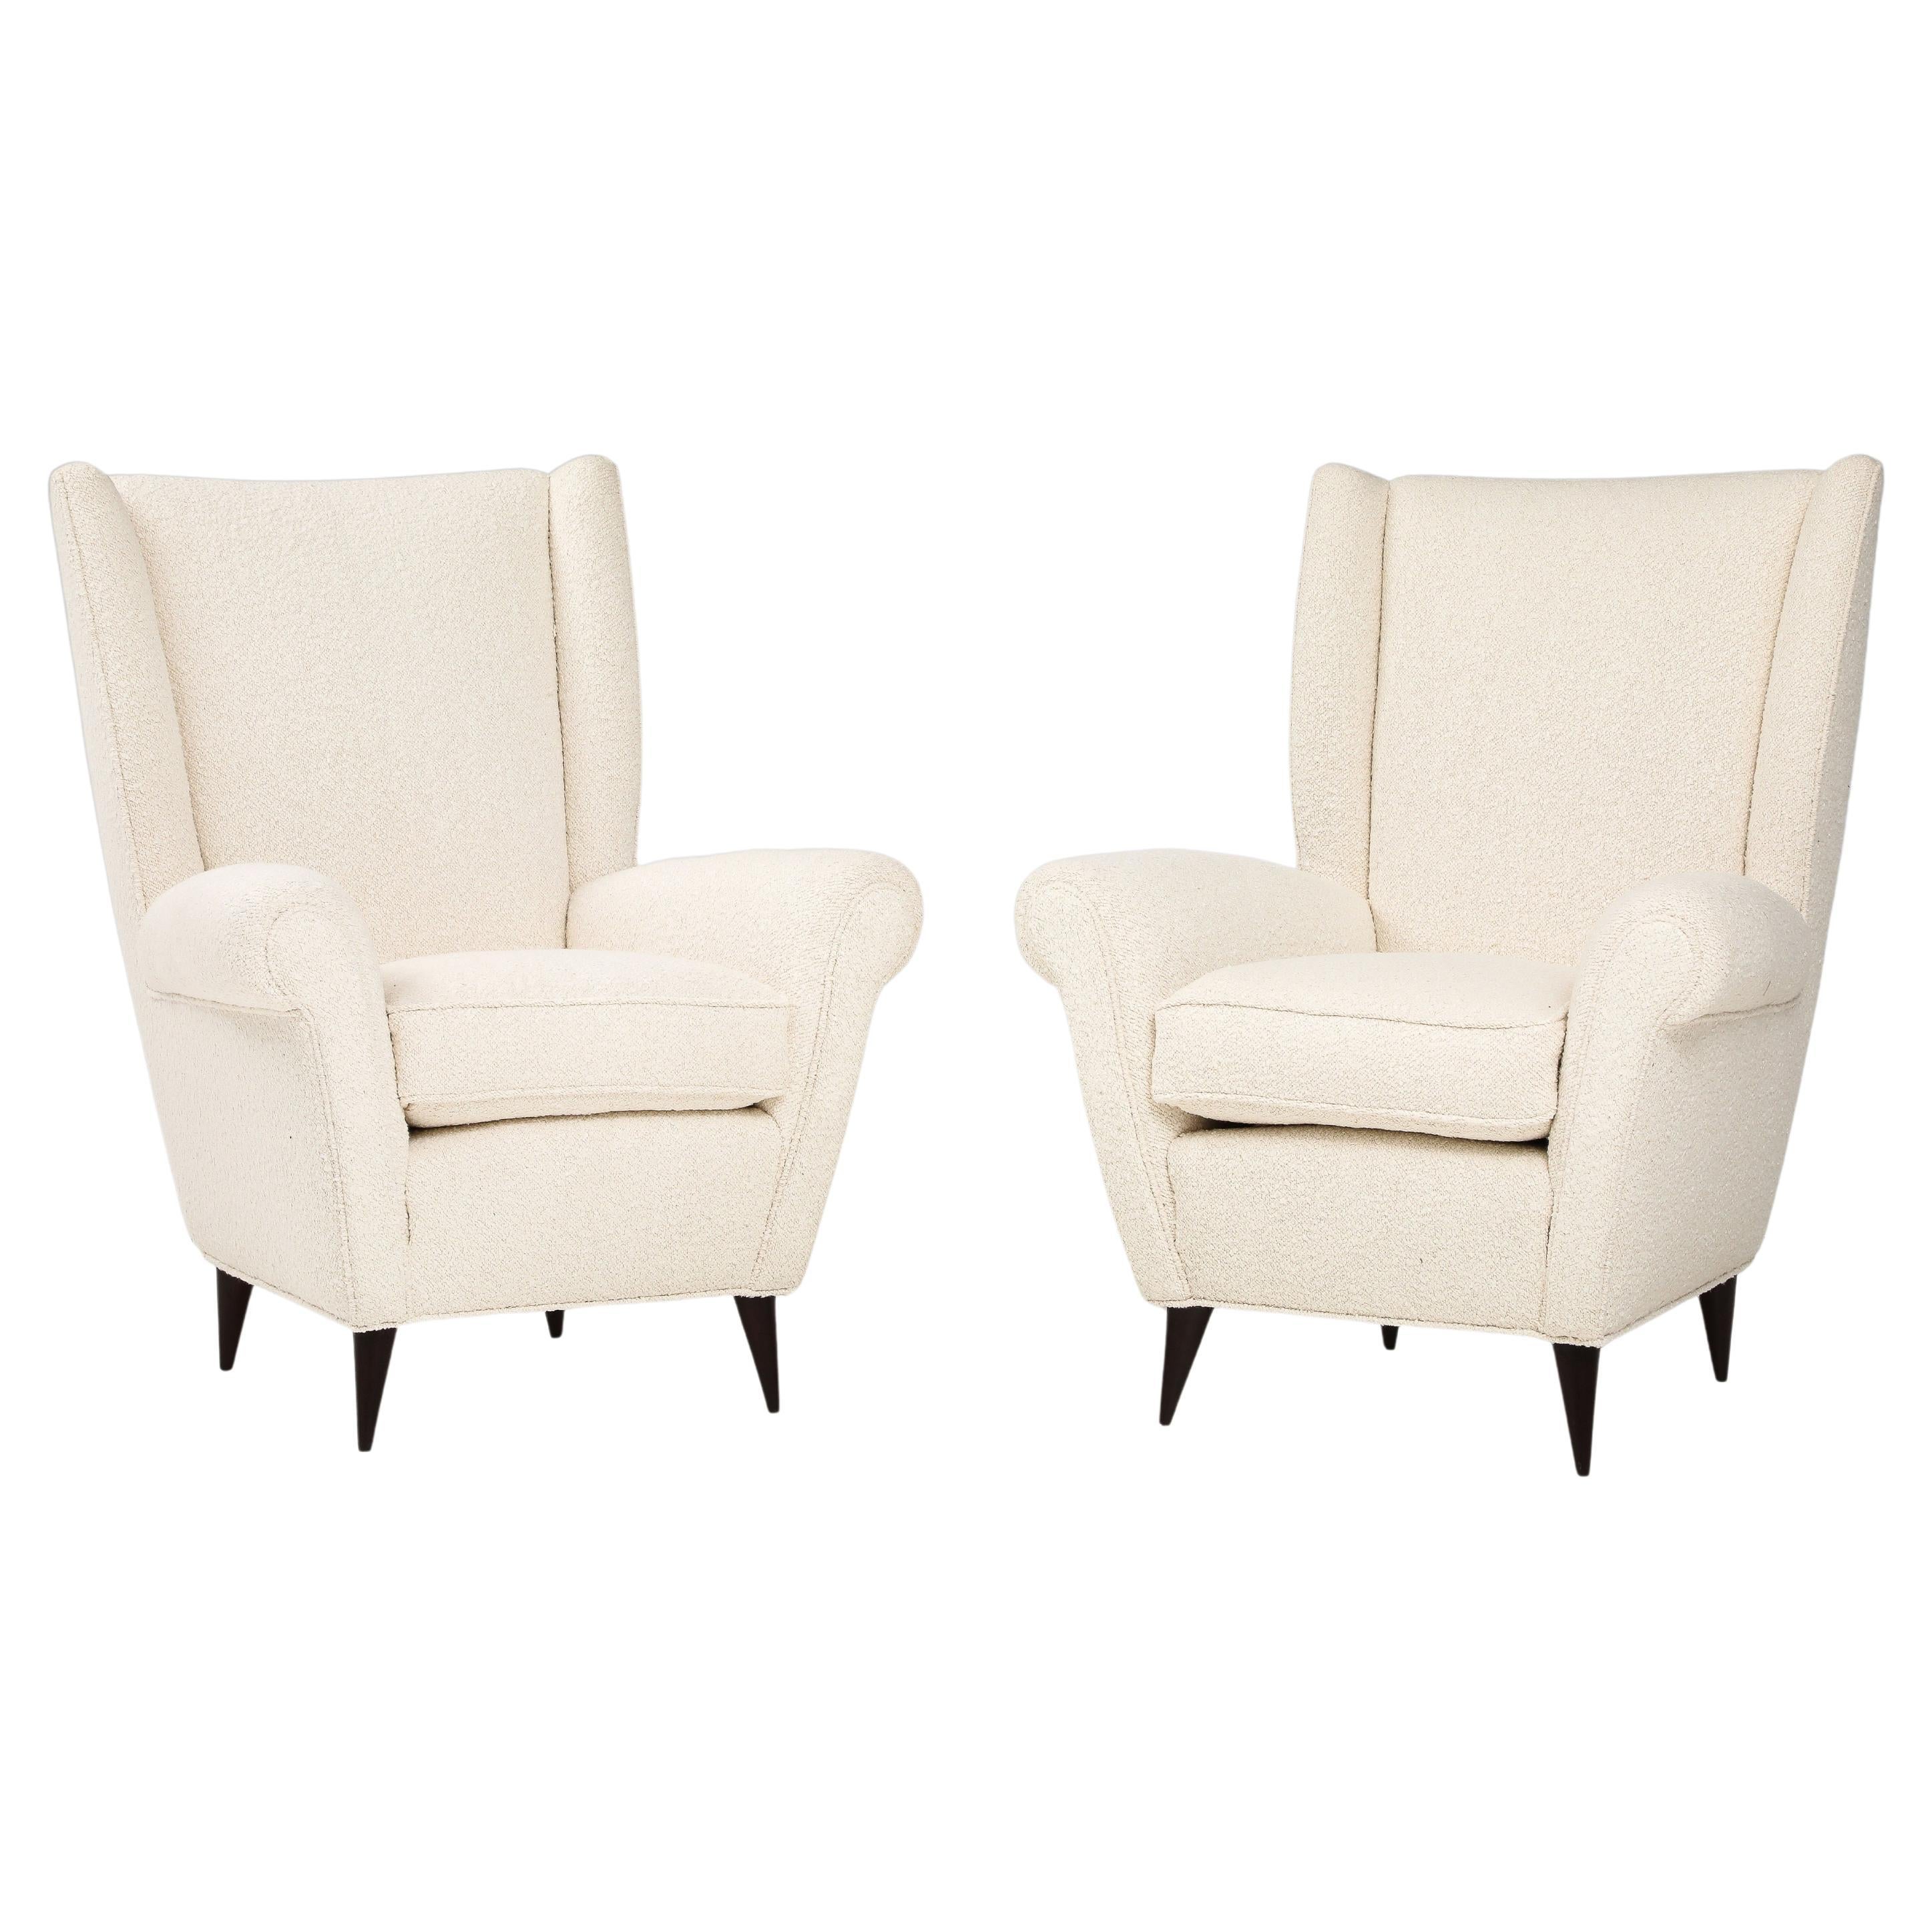 Gio Ponti Pair of High Back Armchairs in Ivory Bouclé, 1950s